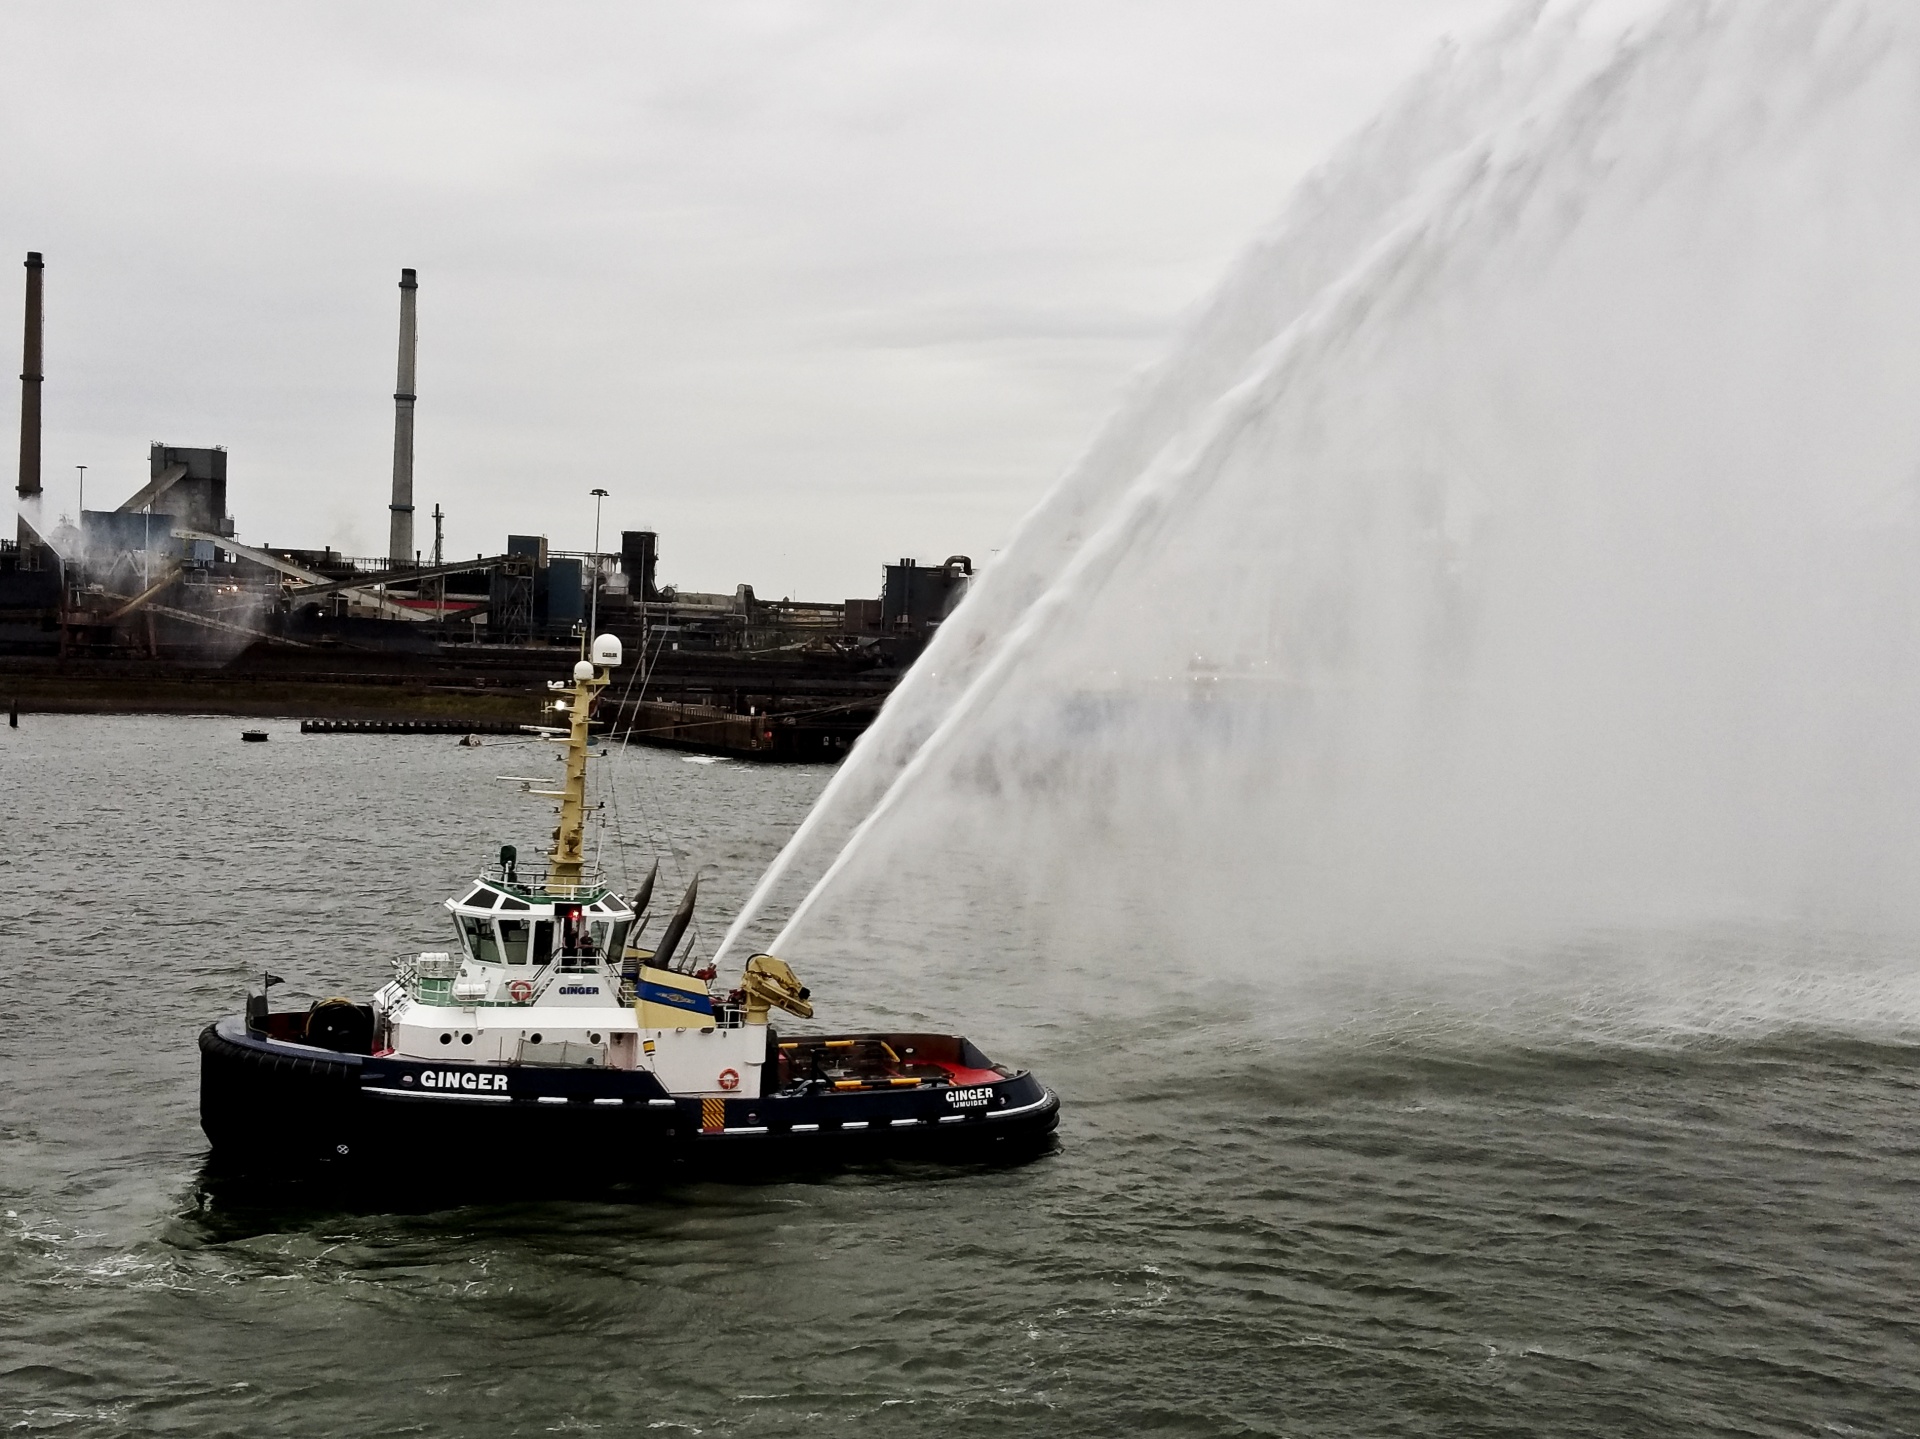 water shooting from a tug boat saluting departing ship